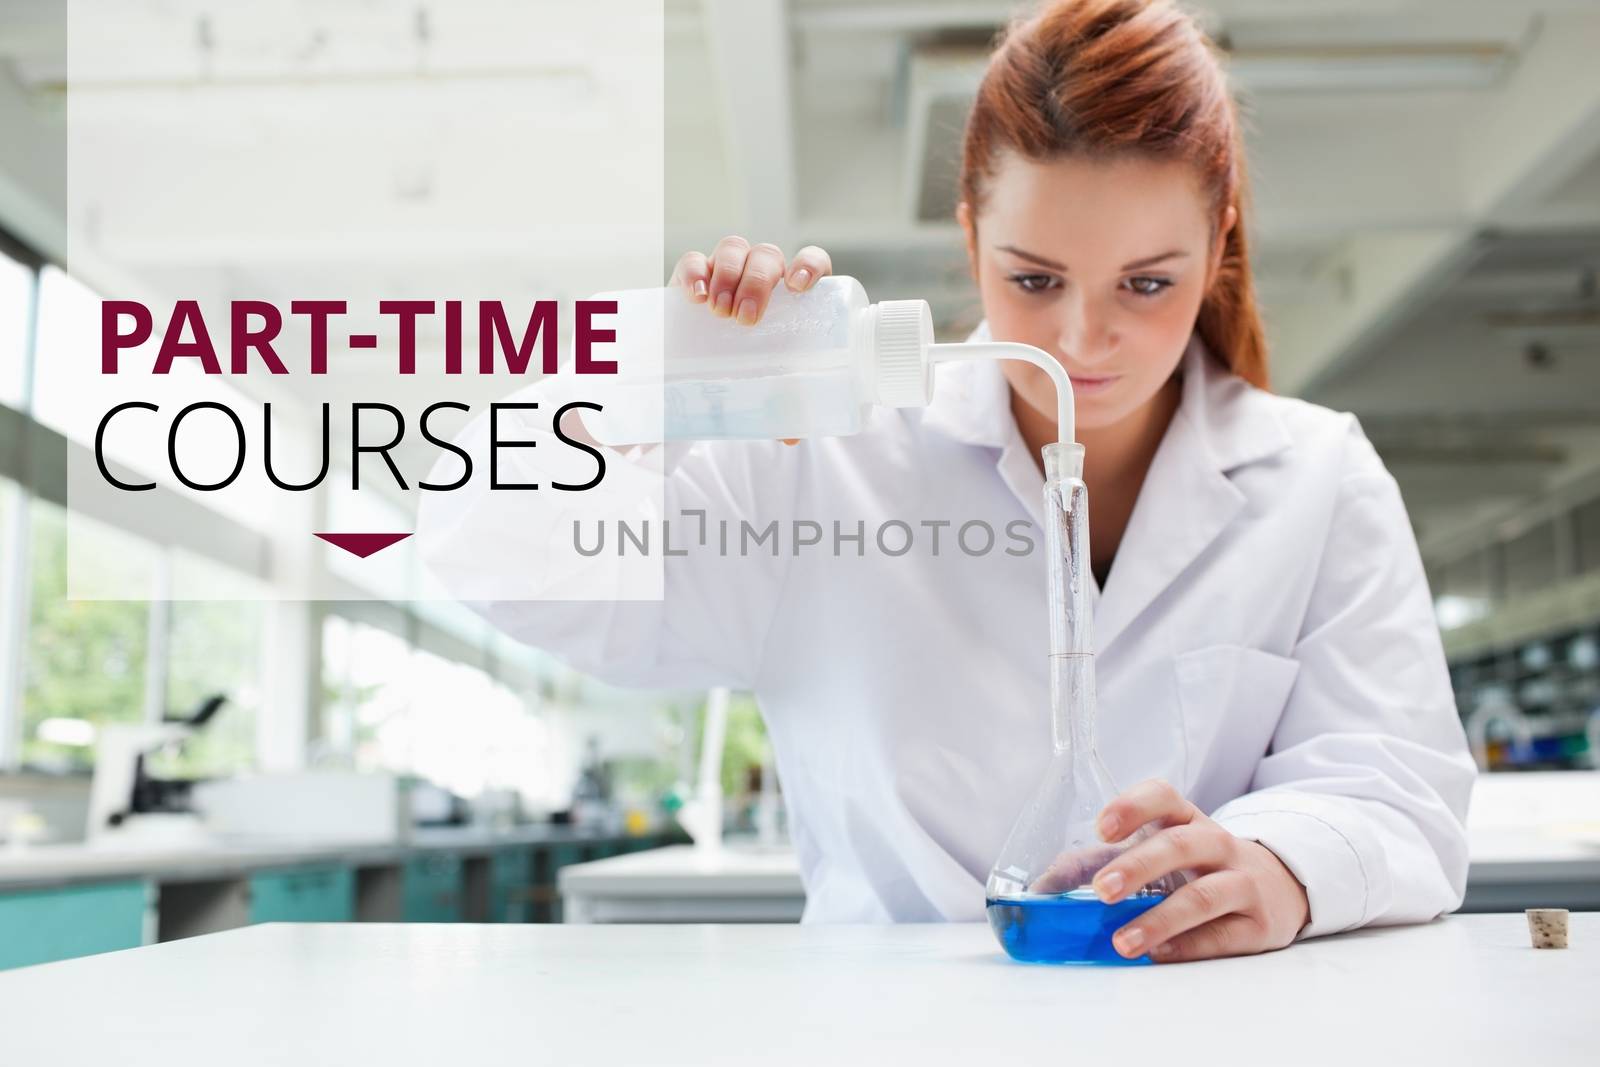 Digital composite of Education and part-time courses text and woman working at a laboratory